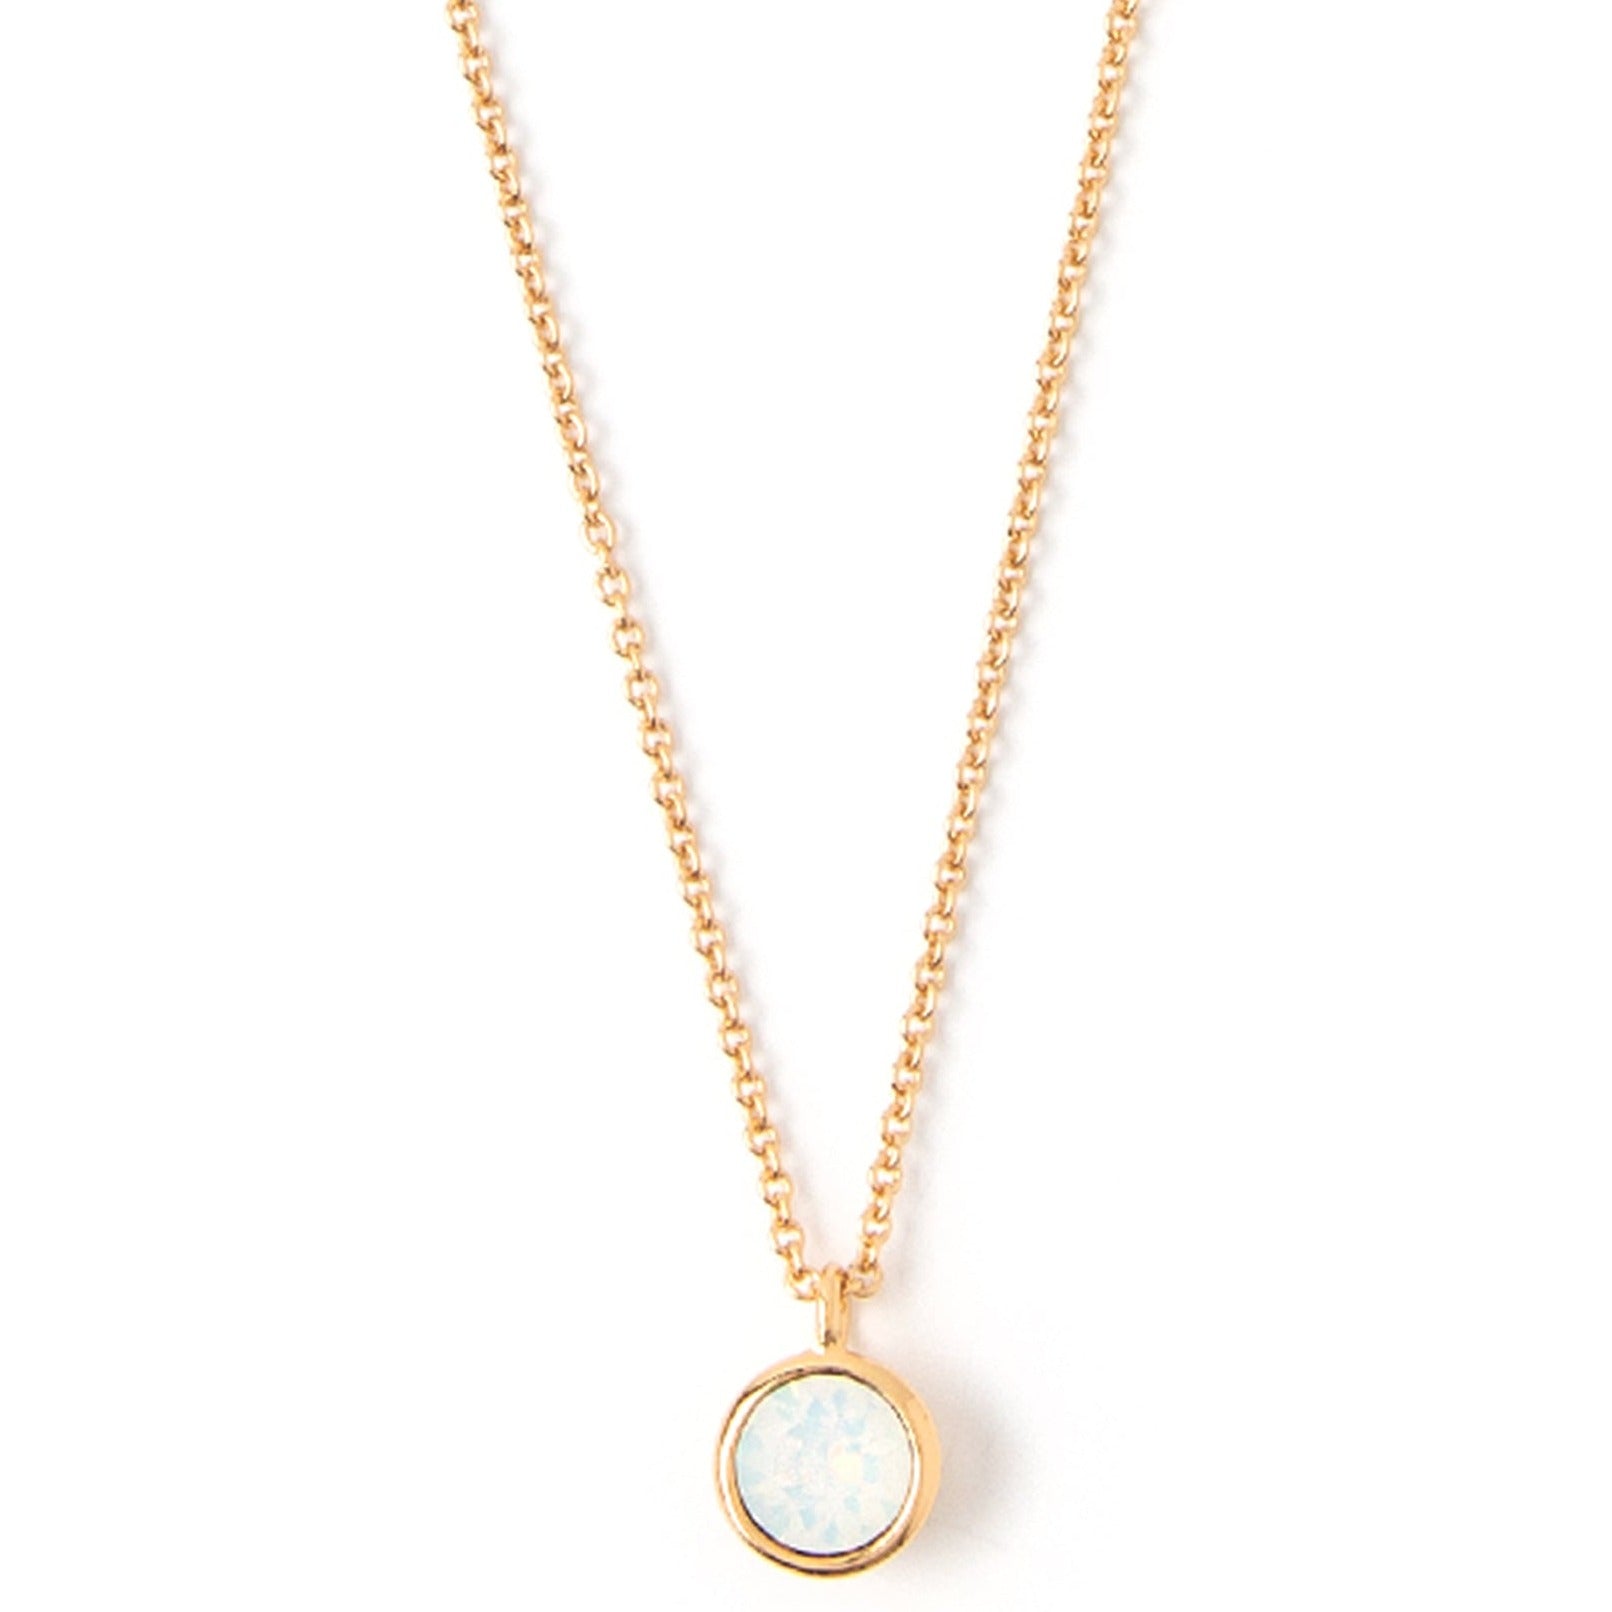 White Opal Necklace Made With Swarovski Crystals - Gold - Orelia London